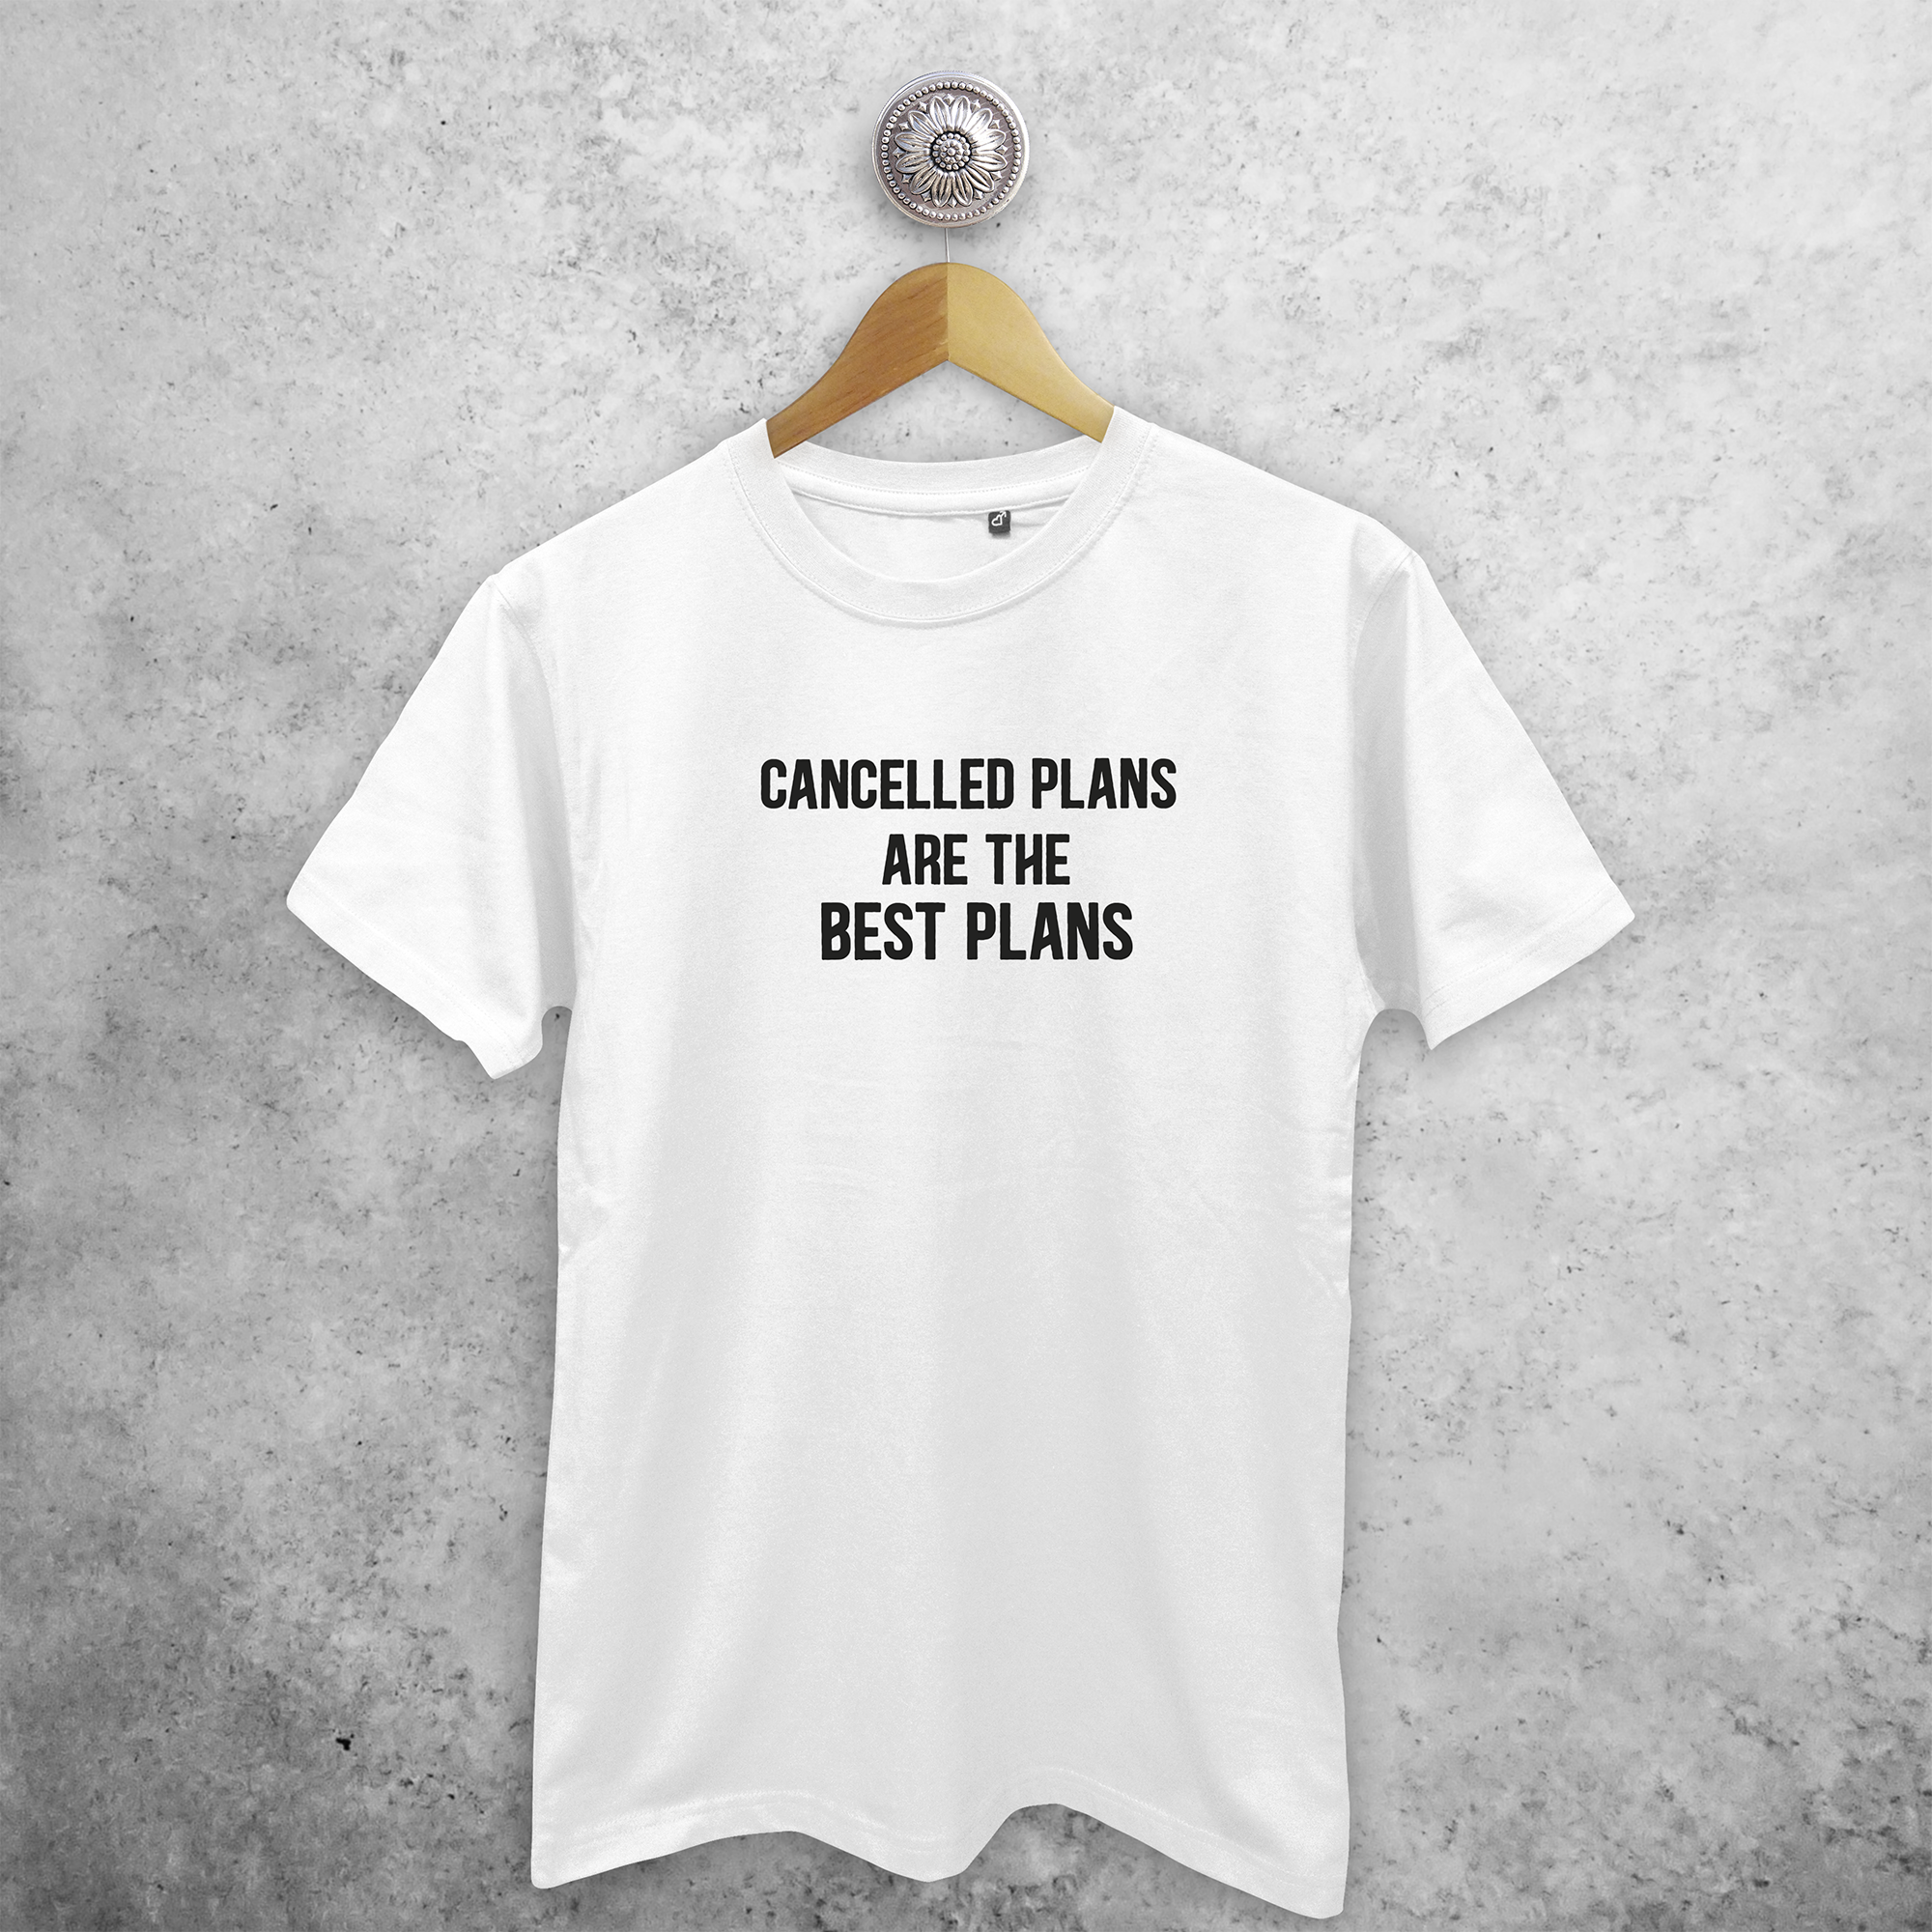 'Cancelled plans are the best plans' adult shirt